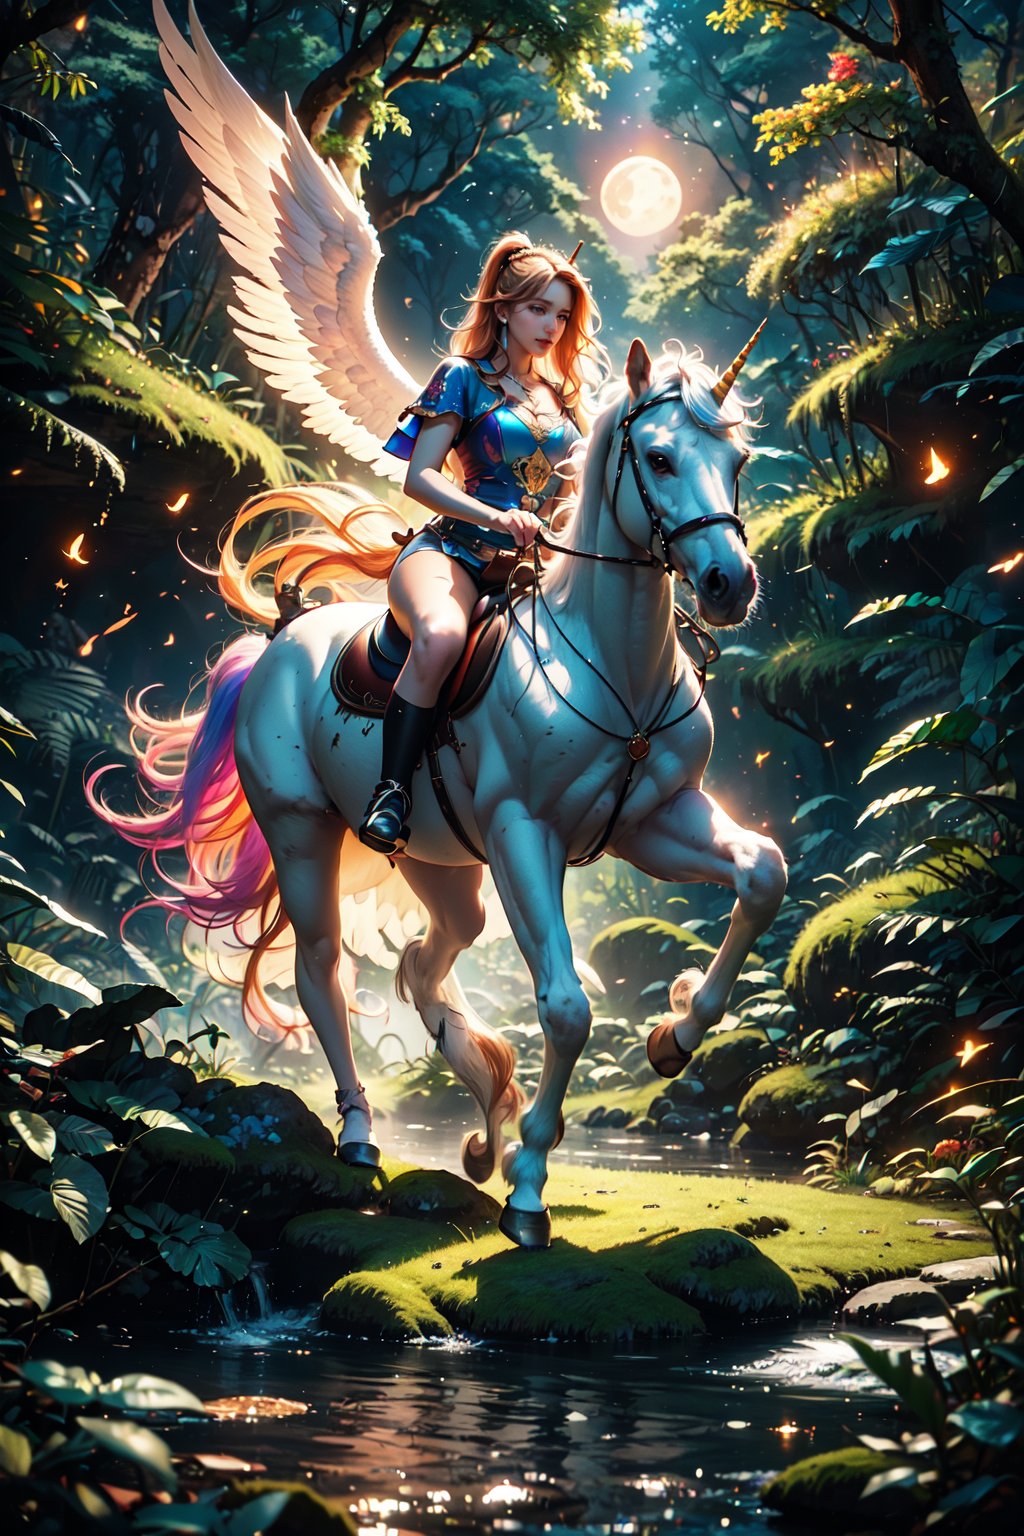 score_9, score_8_up, score_7_up, score_6_up, 
(Full body:1.5), 1girl, Angel wings, riding, horseback riding, Unicorn, Rainbow Unicorn, Unicorn horn, Magic Forest, Night sky, moon, fireflies, waterfalls, (Masterpiece, Best Quality, 8k:1.2), (Ultra-Detailed, Highres, Extremely Detailed, Absurdres, Incredibly Absurdres, Huge Filesize:1.1), (Photorealistic:1.3), By Futurevolab, Portrait, Ultra-Realistic Illustration, Digital Painting.,Rainbow Unicorn